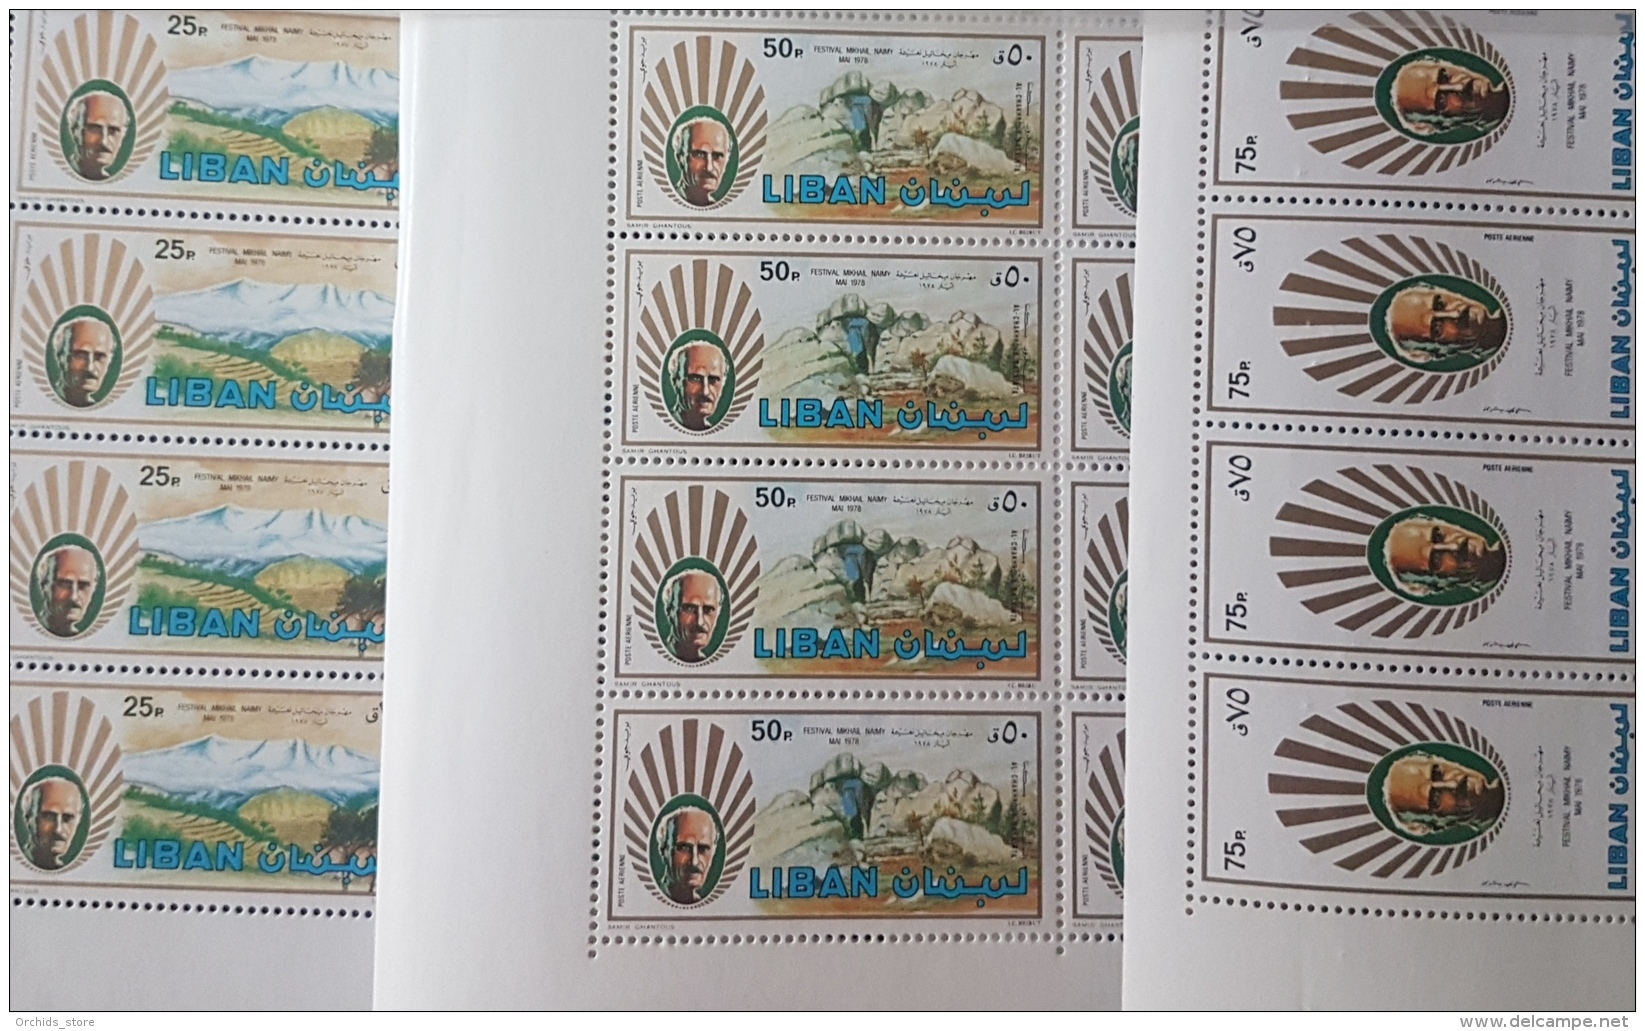 GL - Lebanon 1978 Complete Set 3v. MNH In FULL SHEETS /30 - LARGE SIZE - Mikhail Naimy, Poet, Paintings - Liban